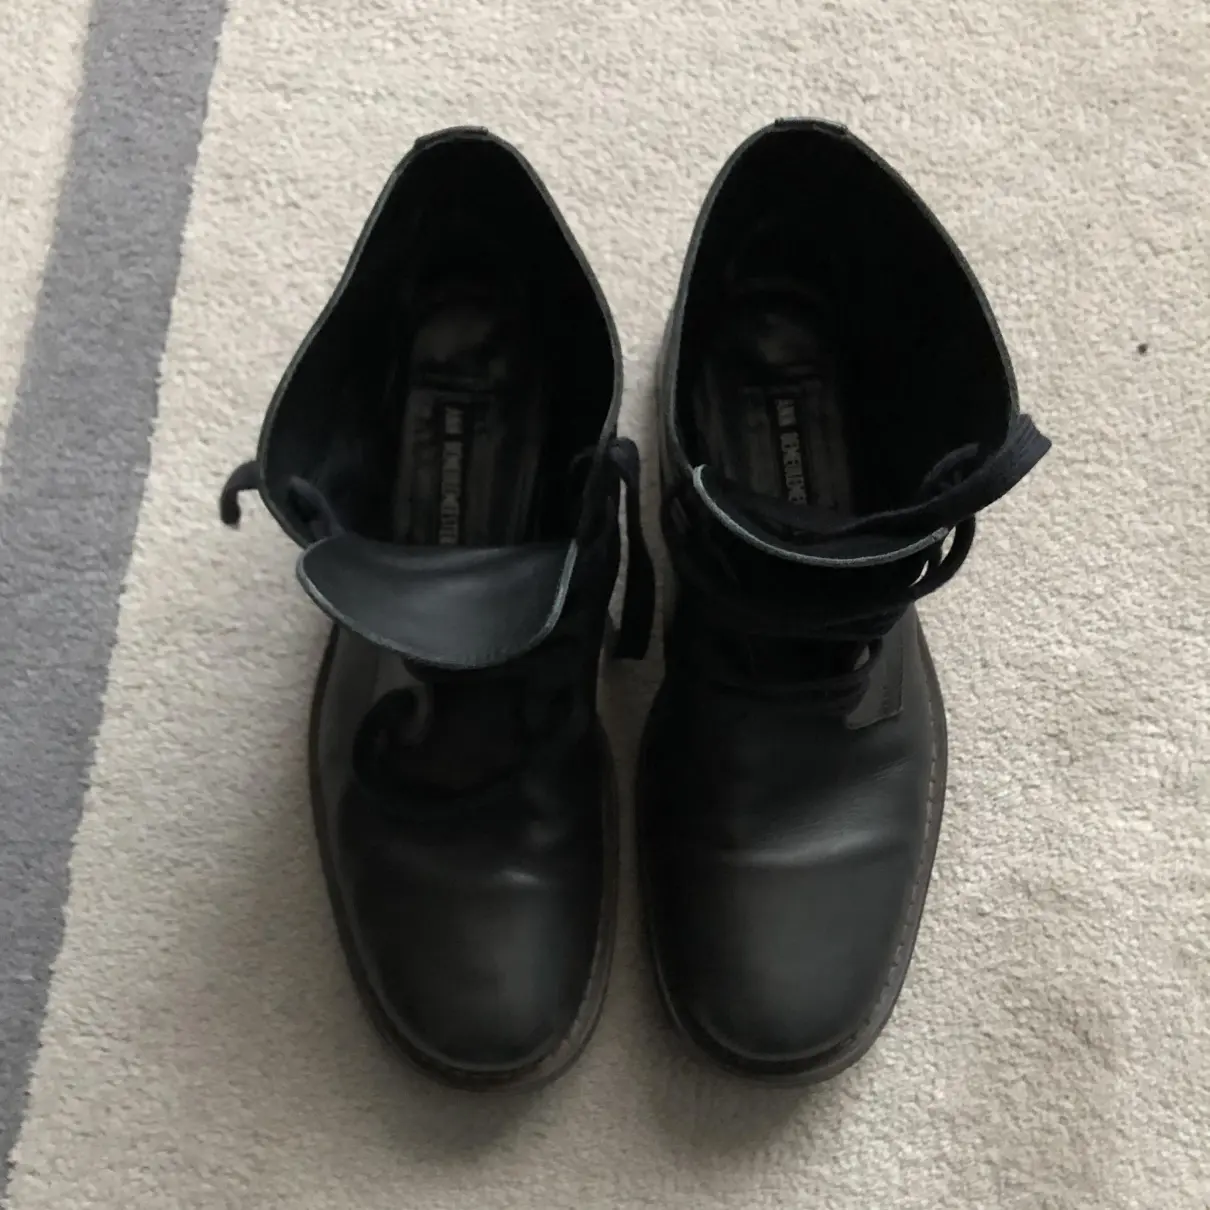 Leather boots Ann Demeulemeester - Vintage